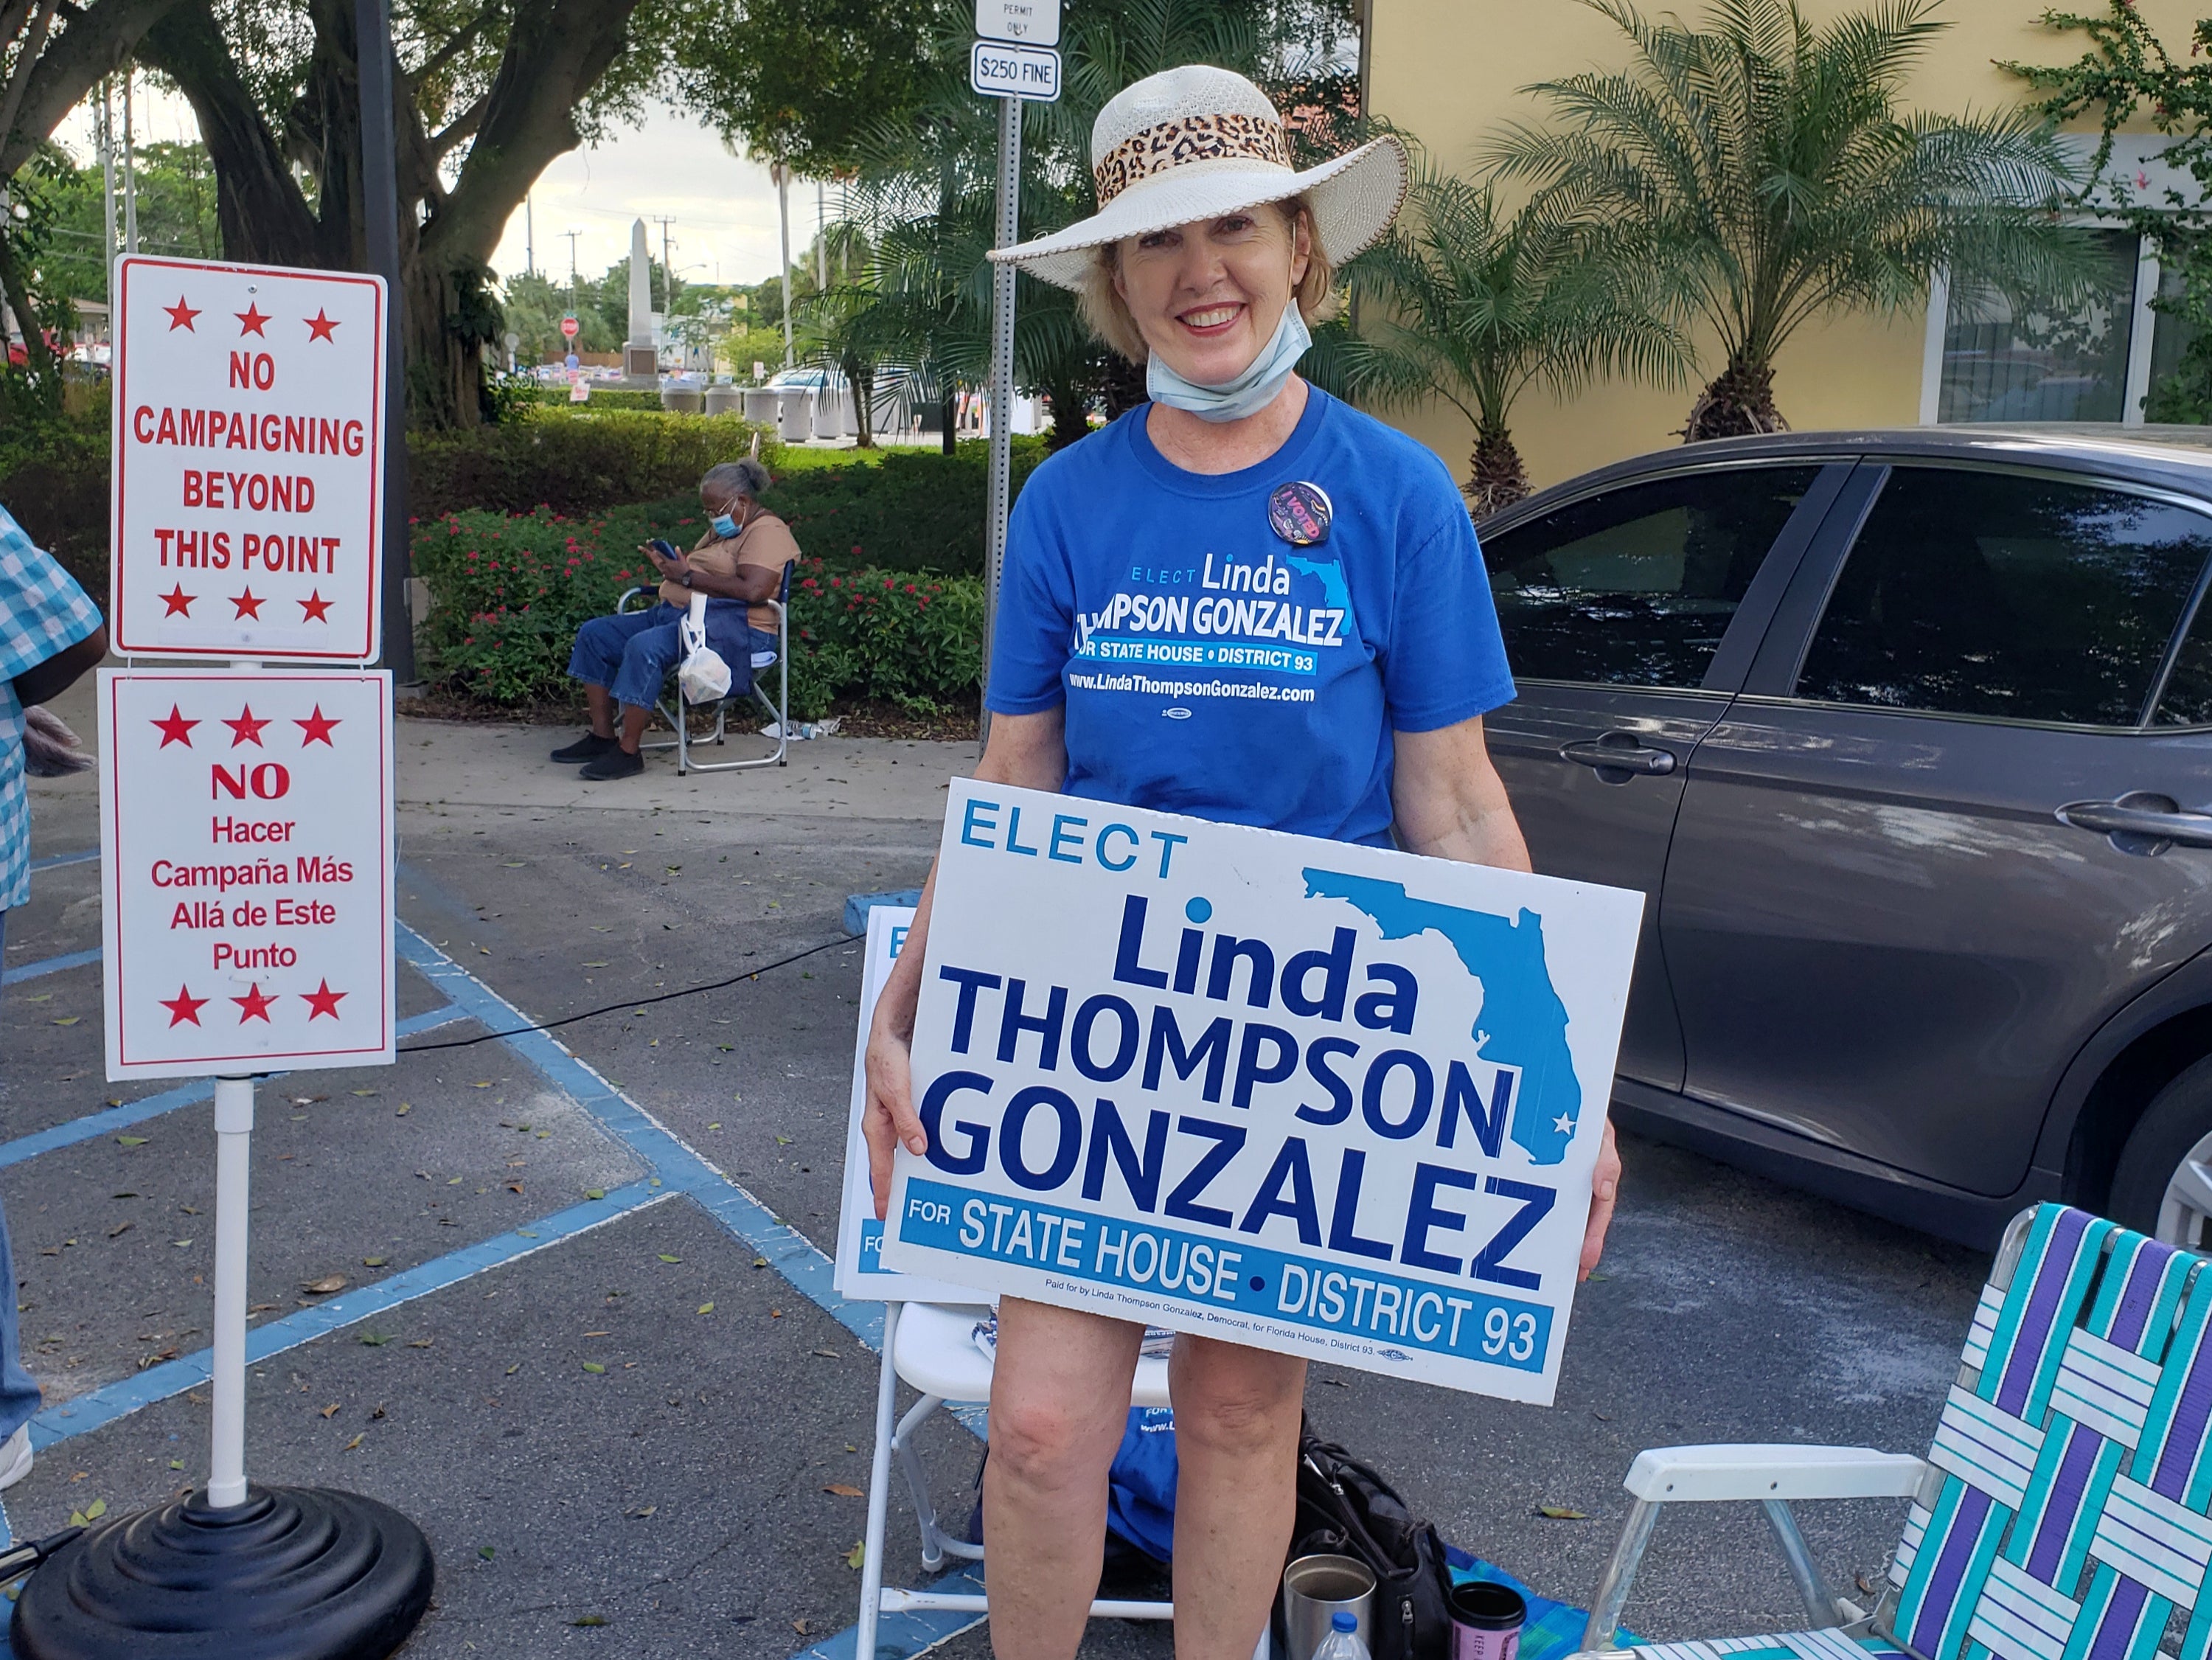 Linda Thompson Gonzalez is running for the Florida state house